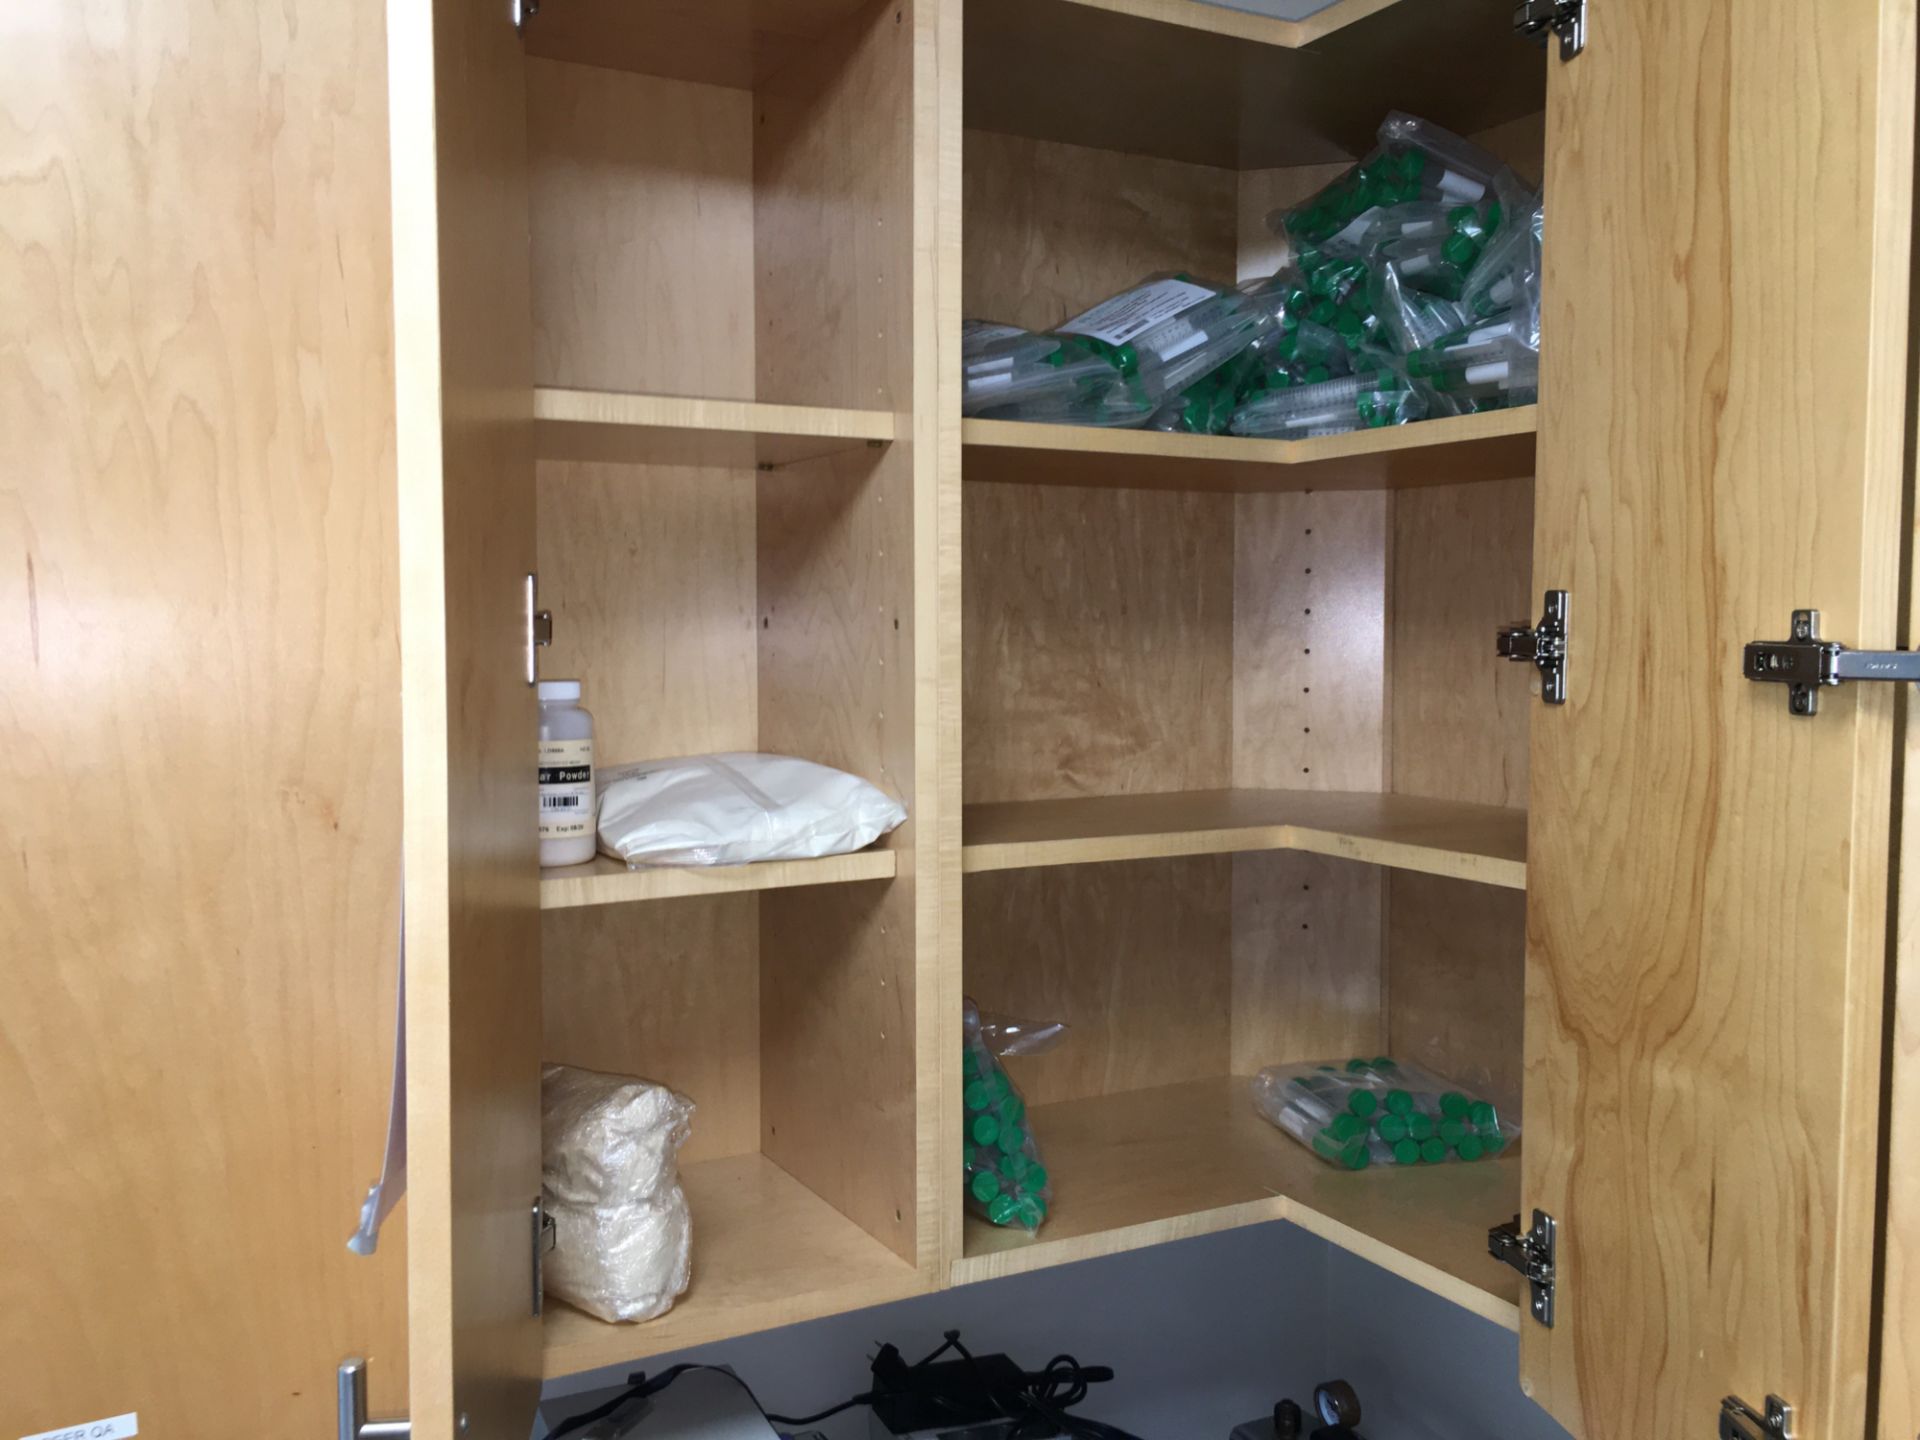 A group of Ass't Lab Supplies in UPPER Cabinets - Image 11 of 33